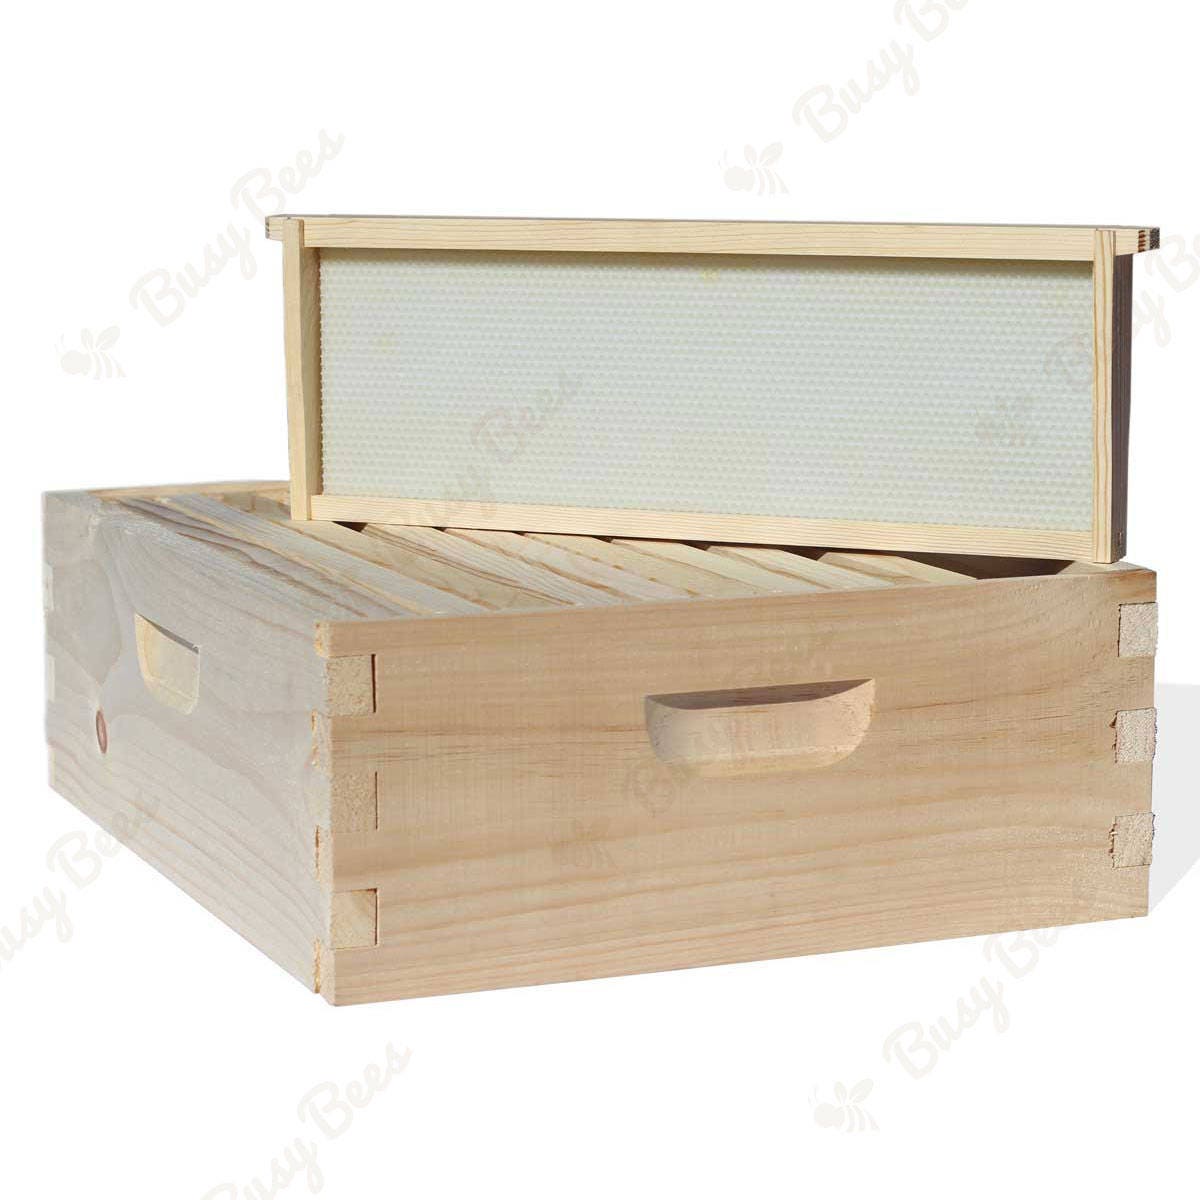 n More Complete 8 Frame Langstroth Bee Hive includes Frames & Foundations LBH08-2D1M Busy Bees 